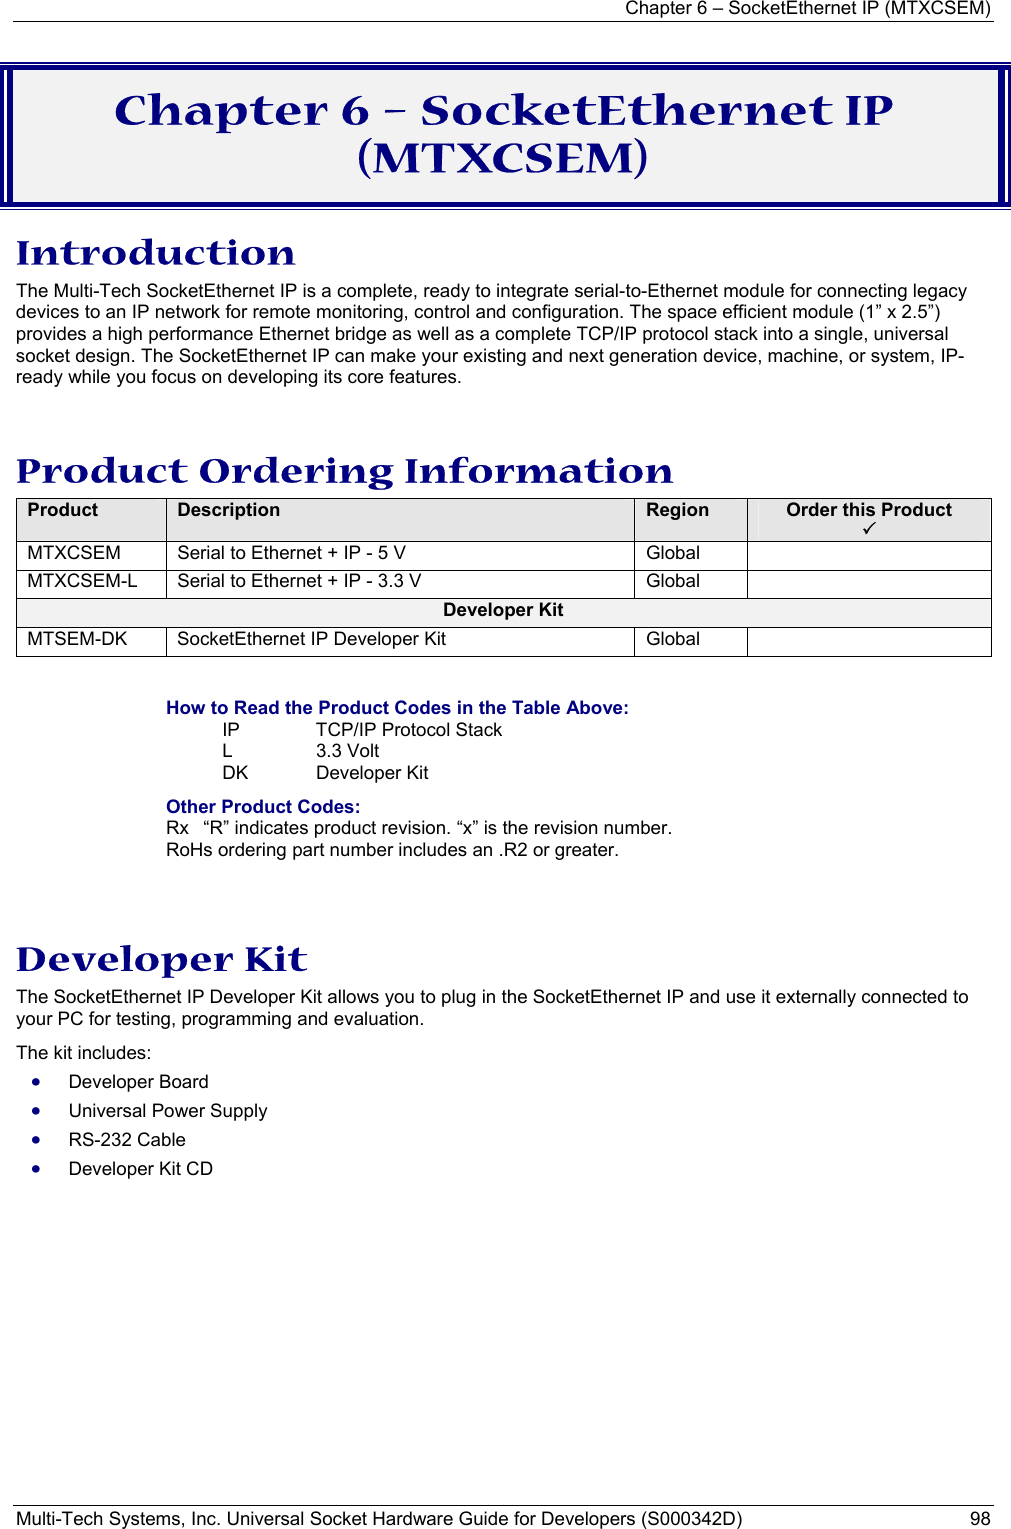 Chapter 6 – SocketEthernet IP (MTXCSEM)  Multi-Tech Systems, Inc. Universal Socket Hardware Guide for Developers (S000342D)  98  Chapter 6 – SocketEthernet IP (MTXCSEM) Introduction The Multi-Tech SocketEthernet IP is a complete, ready to integrate serial-to-Ethernet module for connecting legacy devices to an IP network for remote monitoring, control and configuration. The space efficient module (1” x 2.5”) provides a high performance Ethernet bridge as well as a complete TCP/IP protocol stack into a single, universal socket design. The SocketEthernet IP can make your existing and next generation device, machine, or system, IP-ready while you focus on developing its core features.  Product Ordering Information Product  Description  Region  Order this Product  3 MTXCSEM  Serial to Ethernet + IP - 5 V         Global   MTXCSEM-L  Serial to Ethernet + IP - 3.3 V       Global   Developer Kit MTSEM-DK  SocketEthernet IP Developer Kit  Global    How to Read the Product Codes in the Table Above: IP  TCP/IP Protocol Stack L 3.3 Volt  DK Developer Kit Other Product Codes: Rx  “R” indicates product revision. “x” is the revision number. RoHs ordering part number includes an .R2 or greater.   Developer Kit The SocketEthernet IP Developer Kit allows you to plug in the SocketEthernet IP and use it externally connected to your PC for testing, programming and evaluation.   The kit includes: • Developer Board • Universal Power Supply • RS-232 Cable • Developer Kit CD 